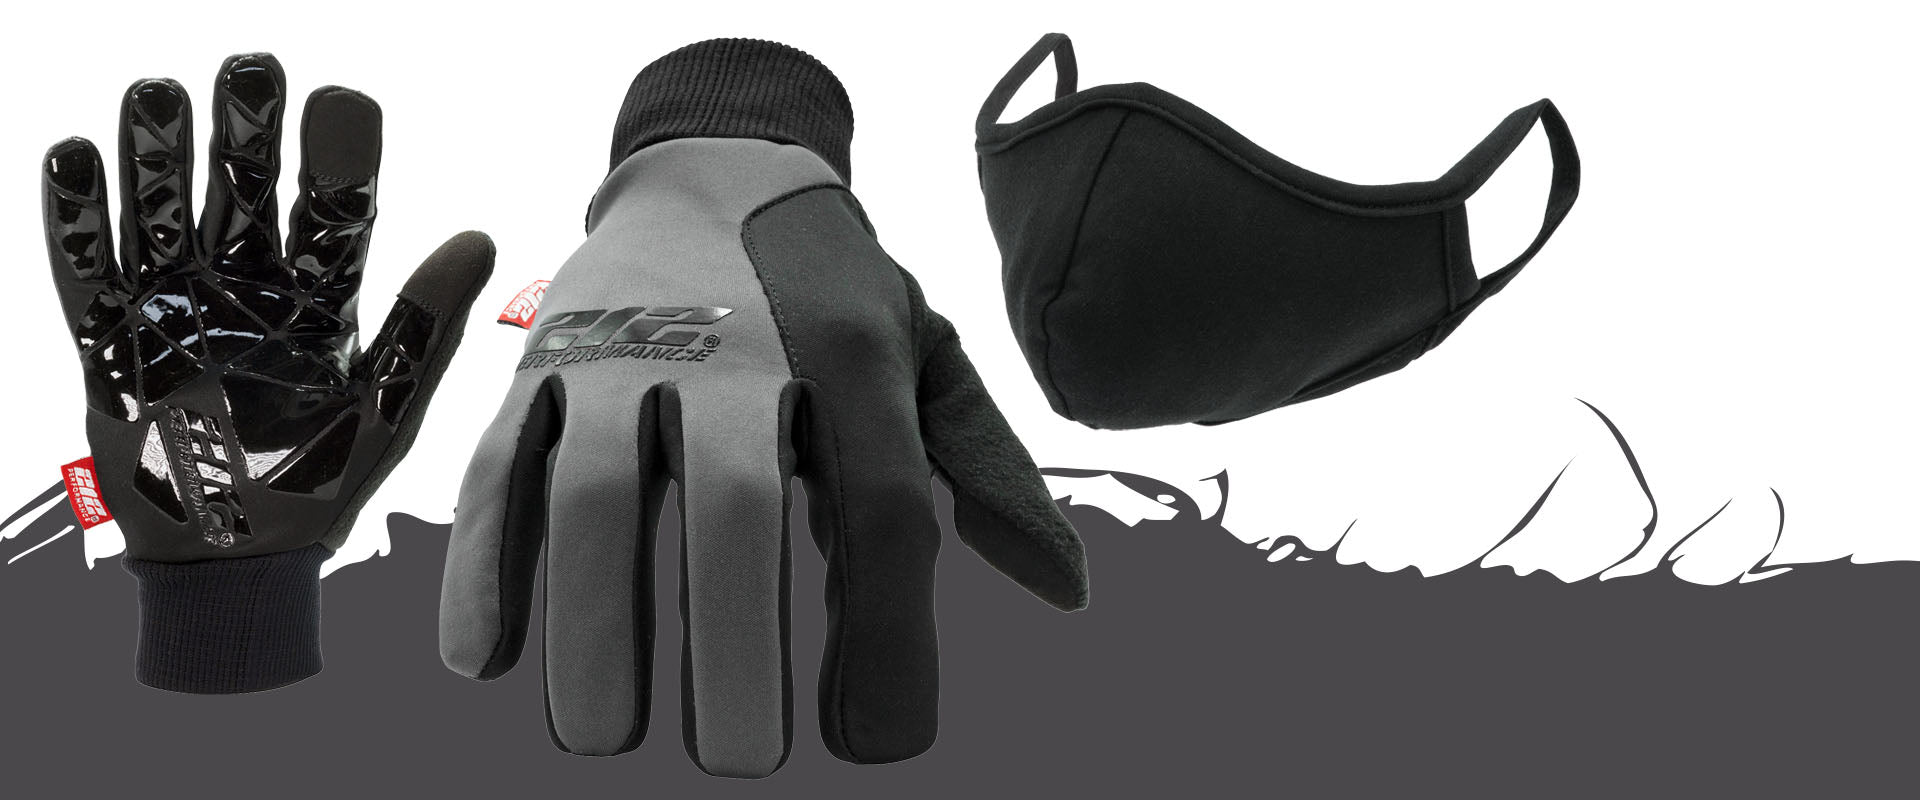 212 Performance Insulated Cut Resistant Leather Winter Work Glove XL  TKLDC3-0811 